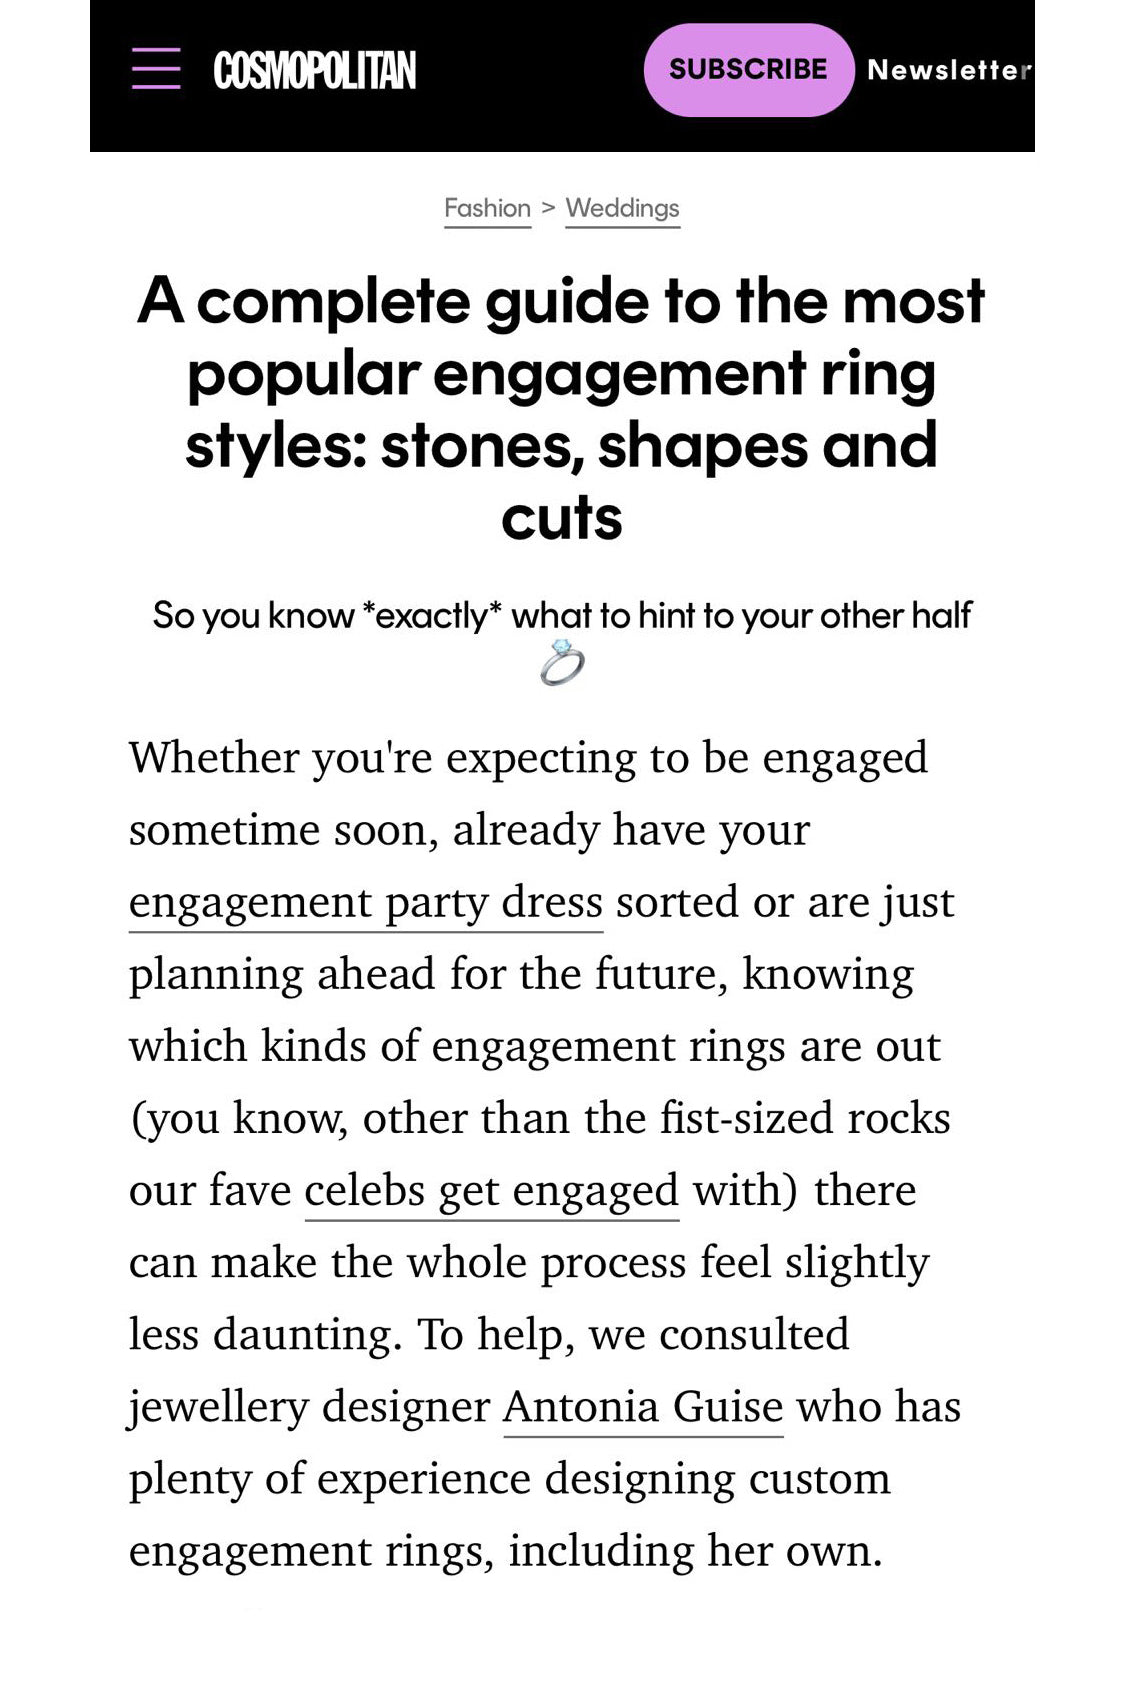 Image of the Glamour Guide to popular engagement rings where Antonia is quoted.